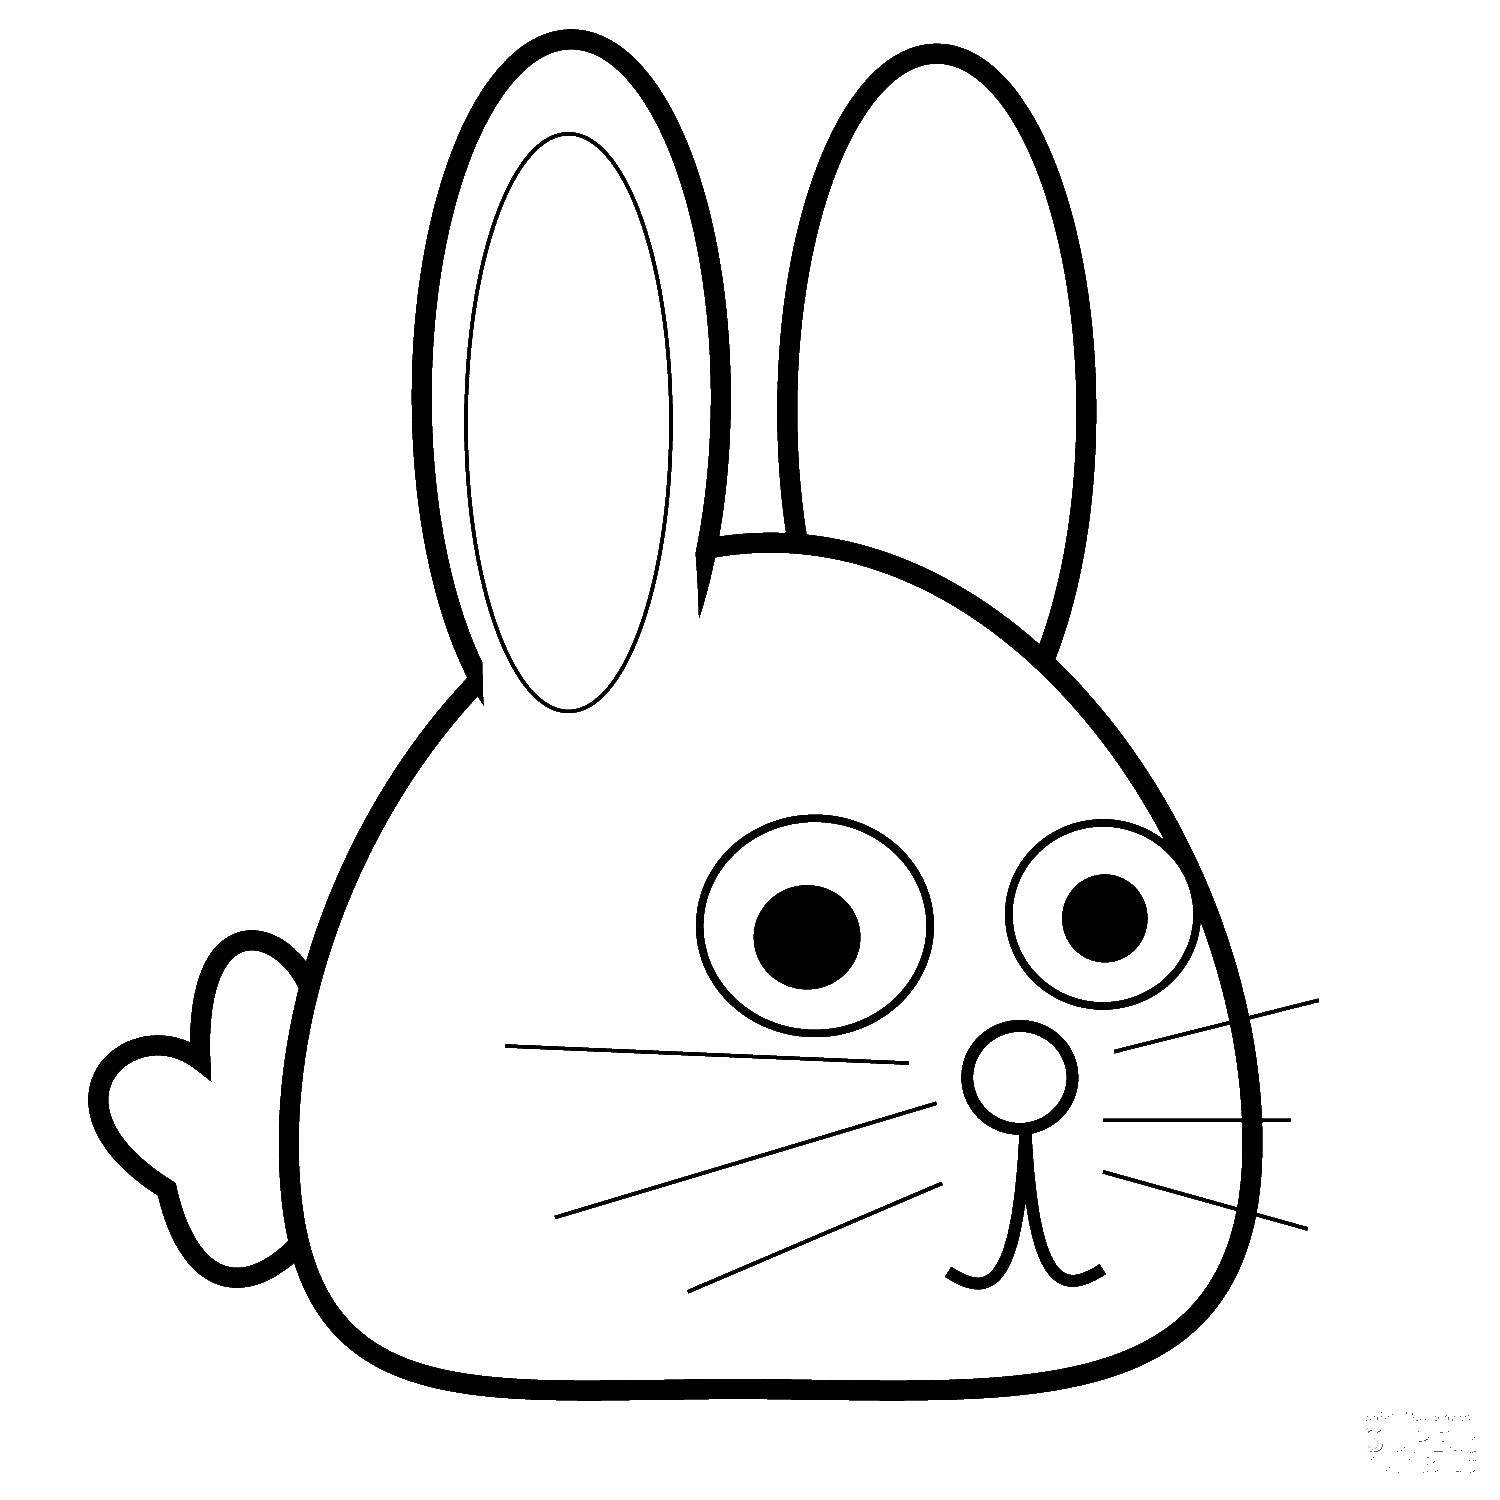 Coloring Rabbit.. Category the rabbit. Tags:  Animals, rabbit.